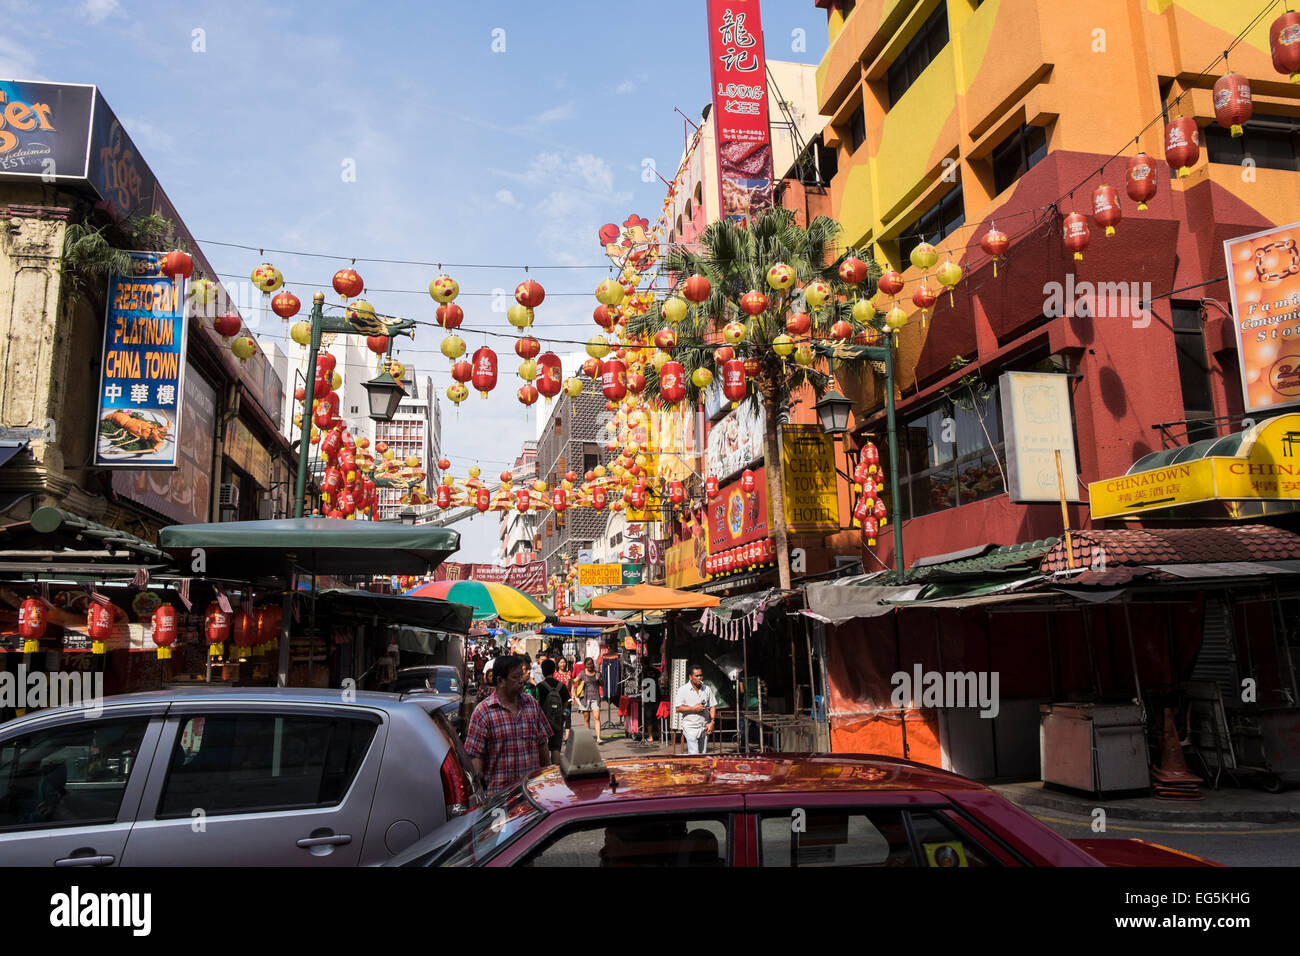 Chinatown in Kuala Lumpur decorated for the Chinese New Year celebrations, Malaysia. Stock Photo